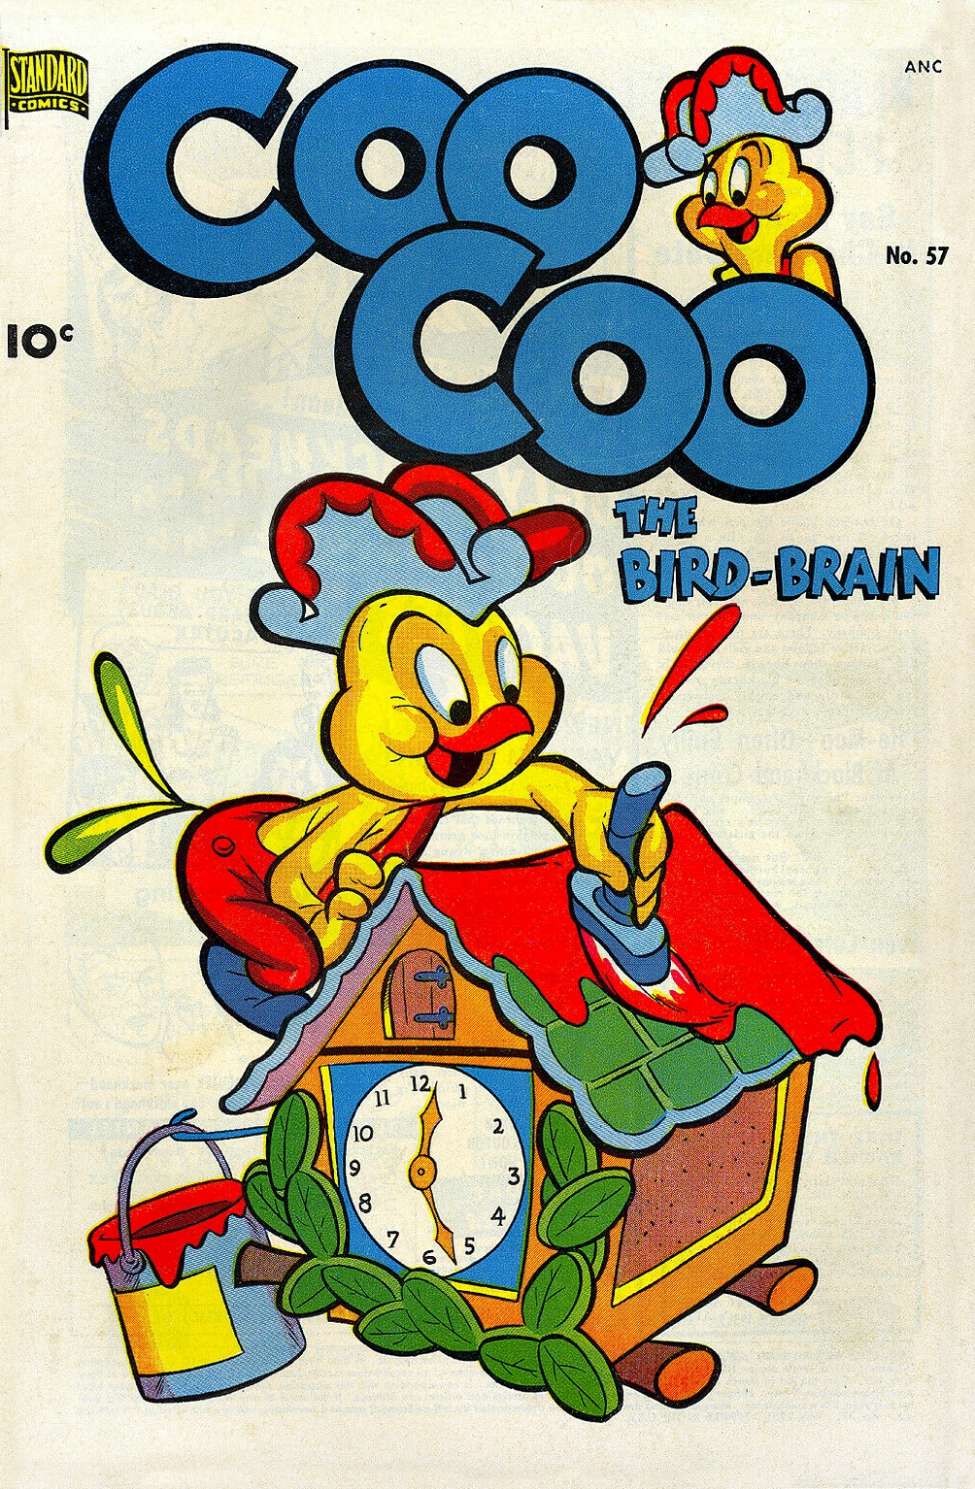 Book Cover For Coo Coo Comics 57